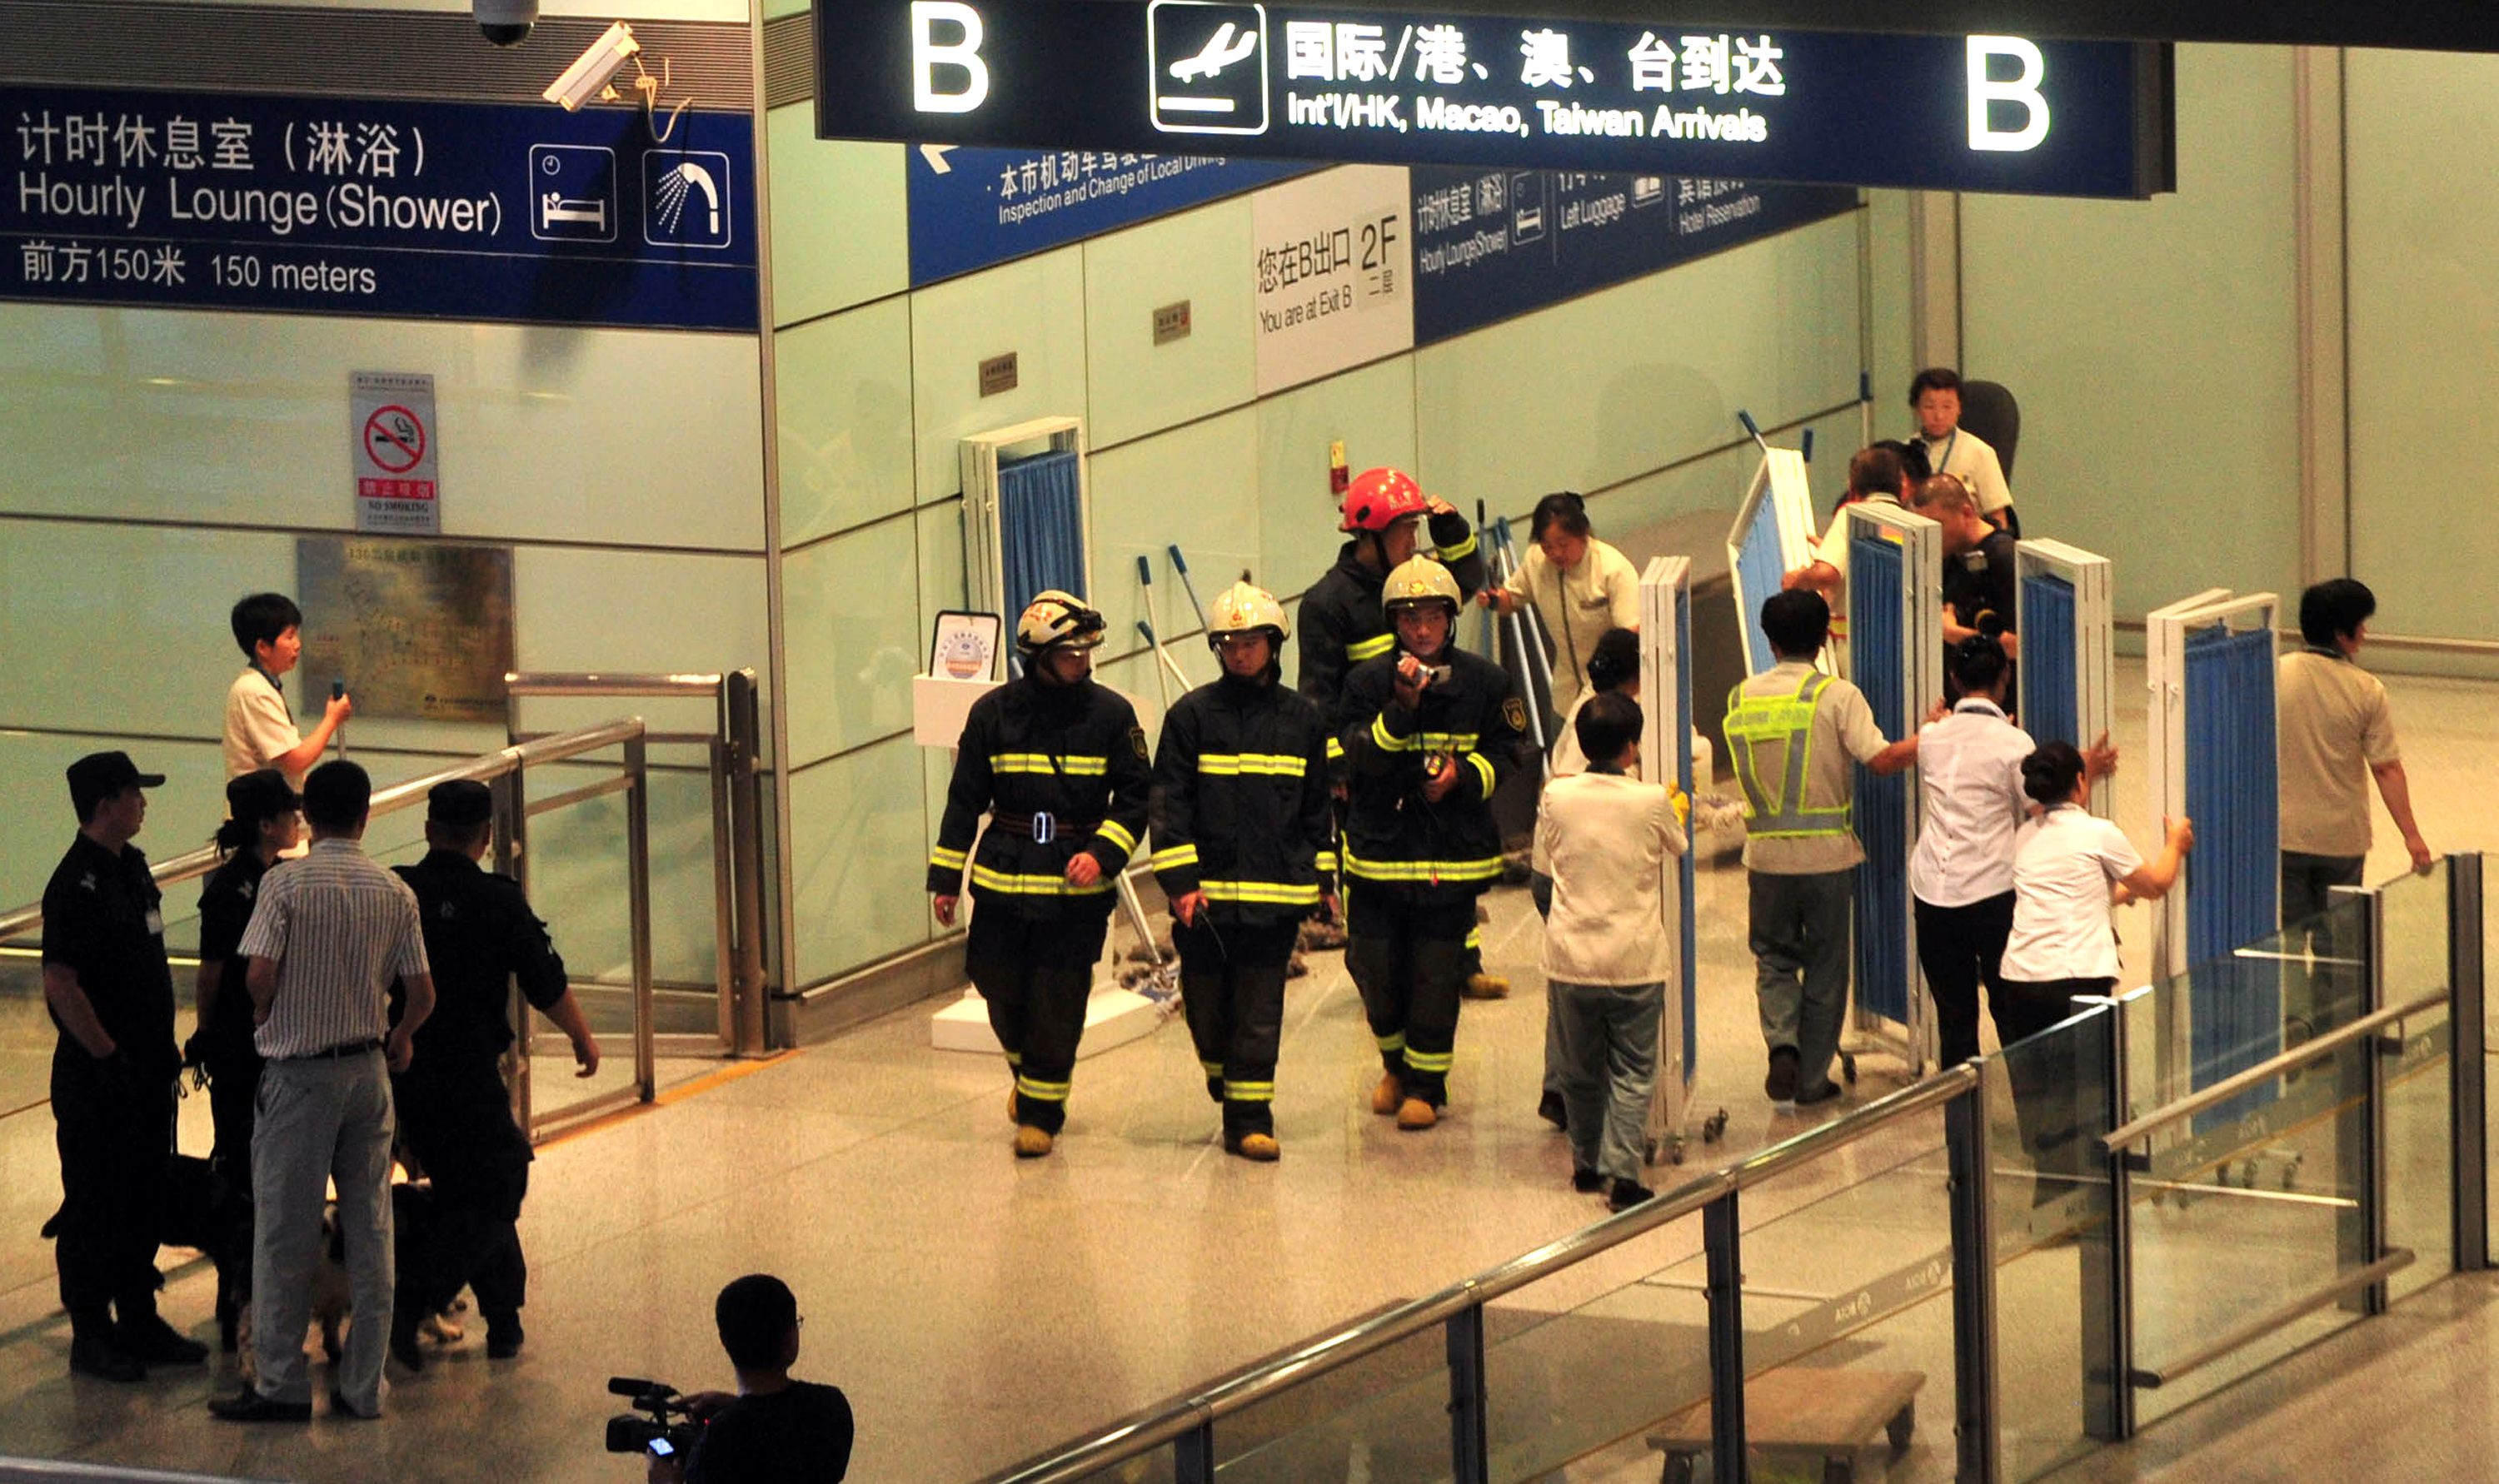 This file picture shows Chinese security personnel moving in to investigate the scene where Ji ignited a home-made explosive device at Beijing's international airport terminal 3, injuring himself but no others. Photo: AFP